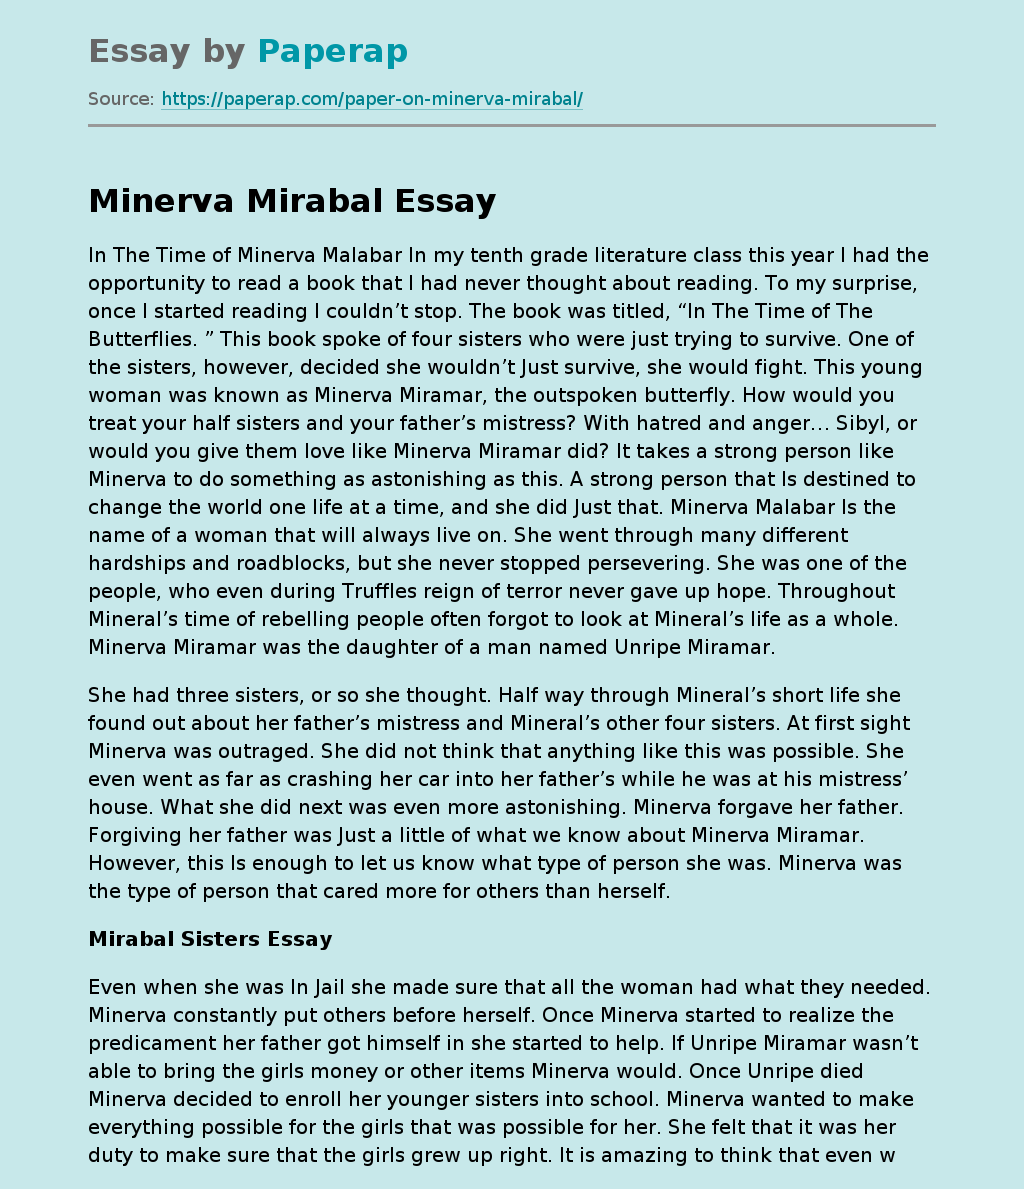 In The Time of Minerva Mirabal